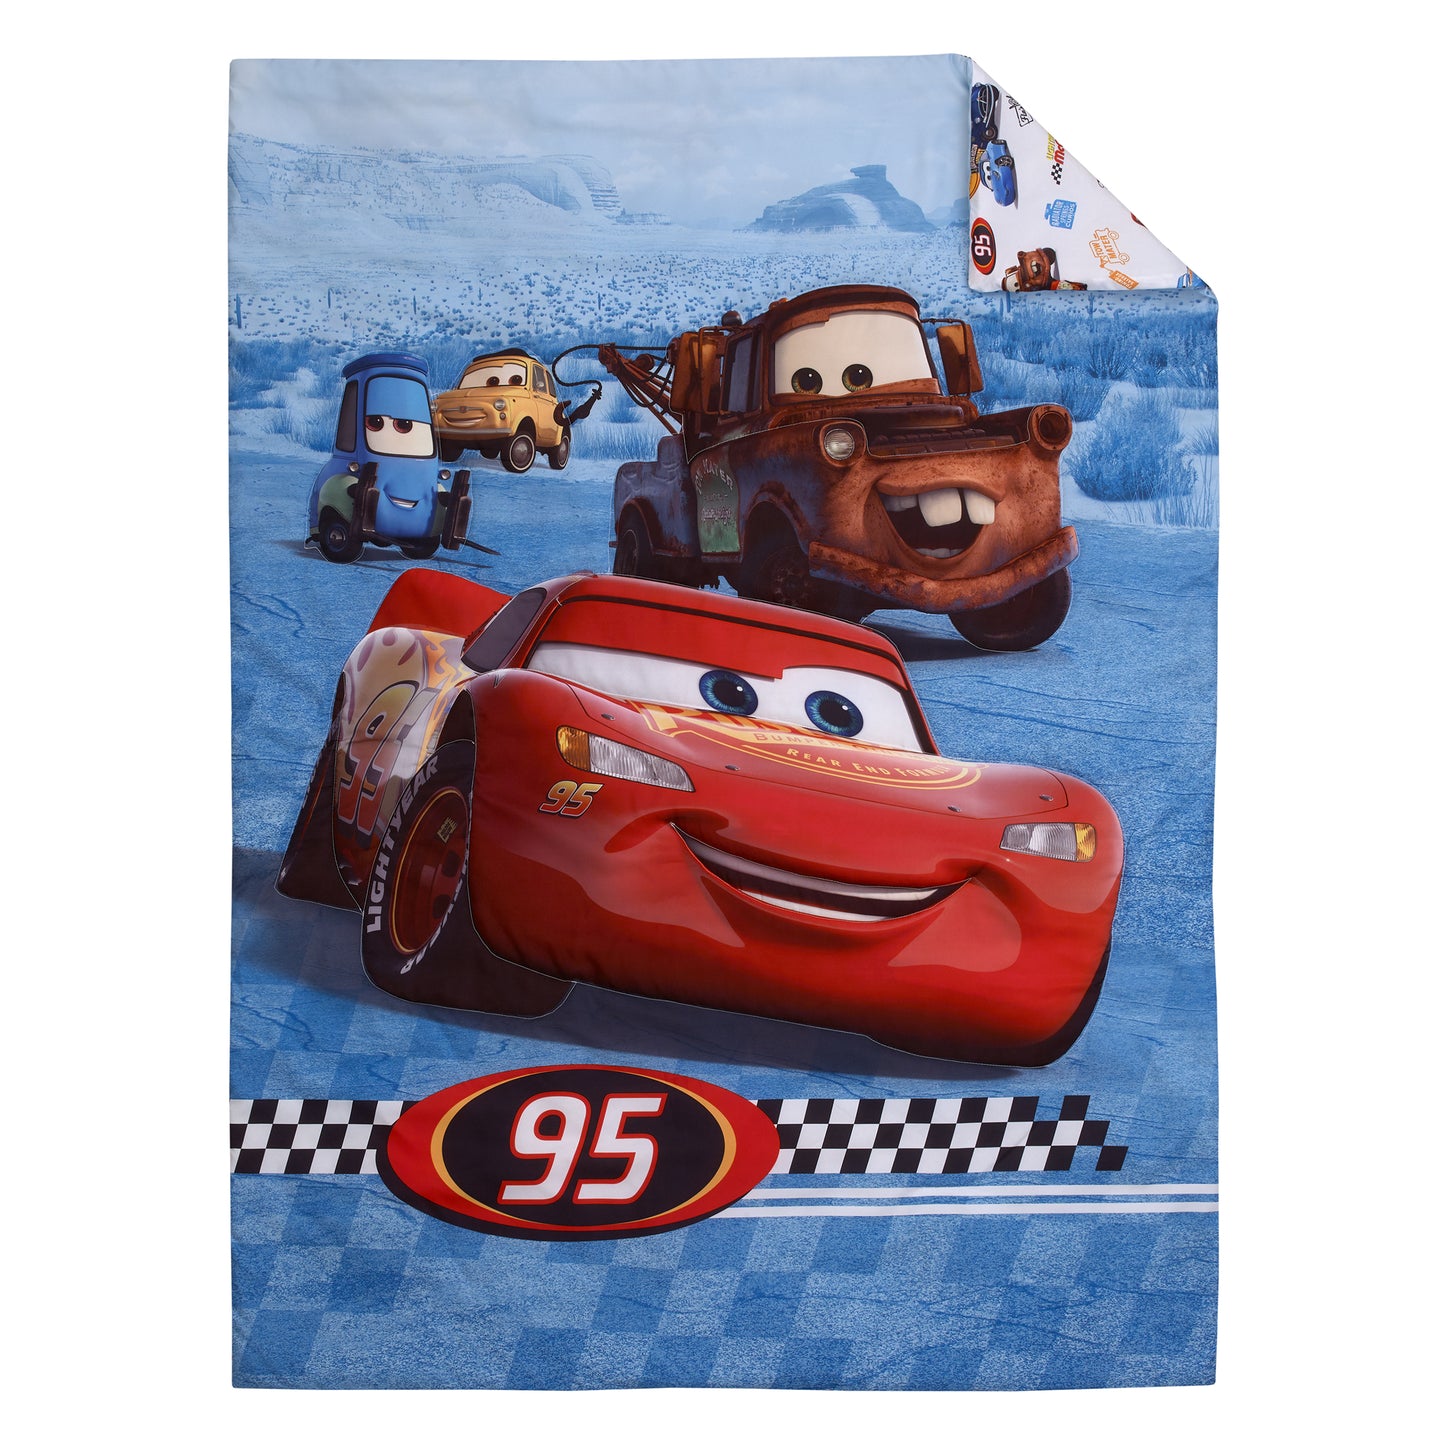 Disney Cars Radiator Springs White, Blue, and Red Lightning McQueen and Tow-Mater 4 Piece Toddler Bed Set - Comforter, Fitted Bottom Sheet, Flat Top Sheet and Reversible Pillowcase